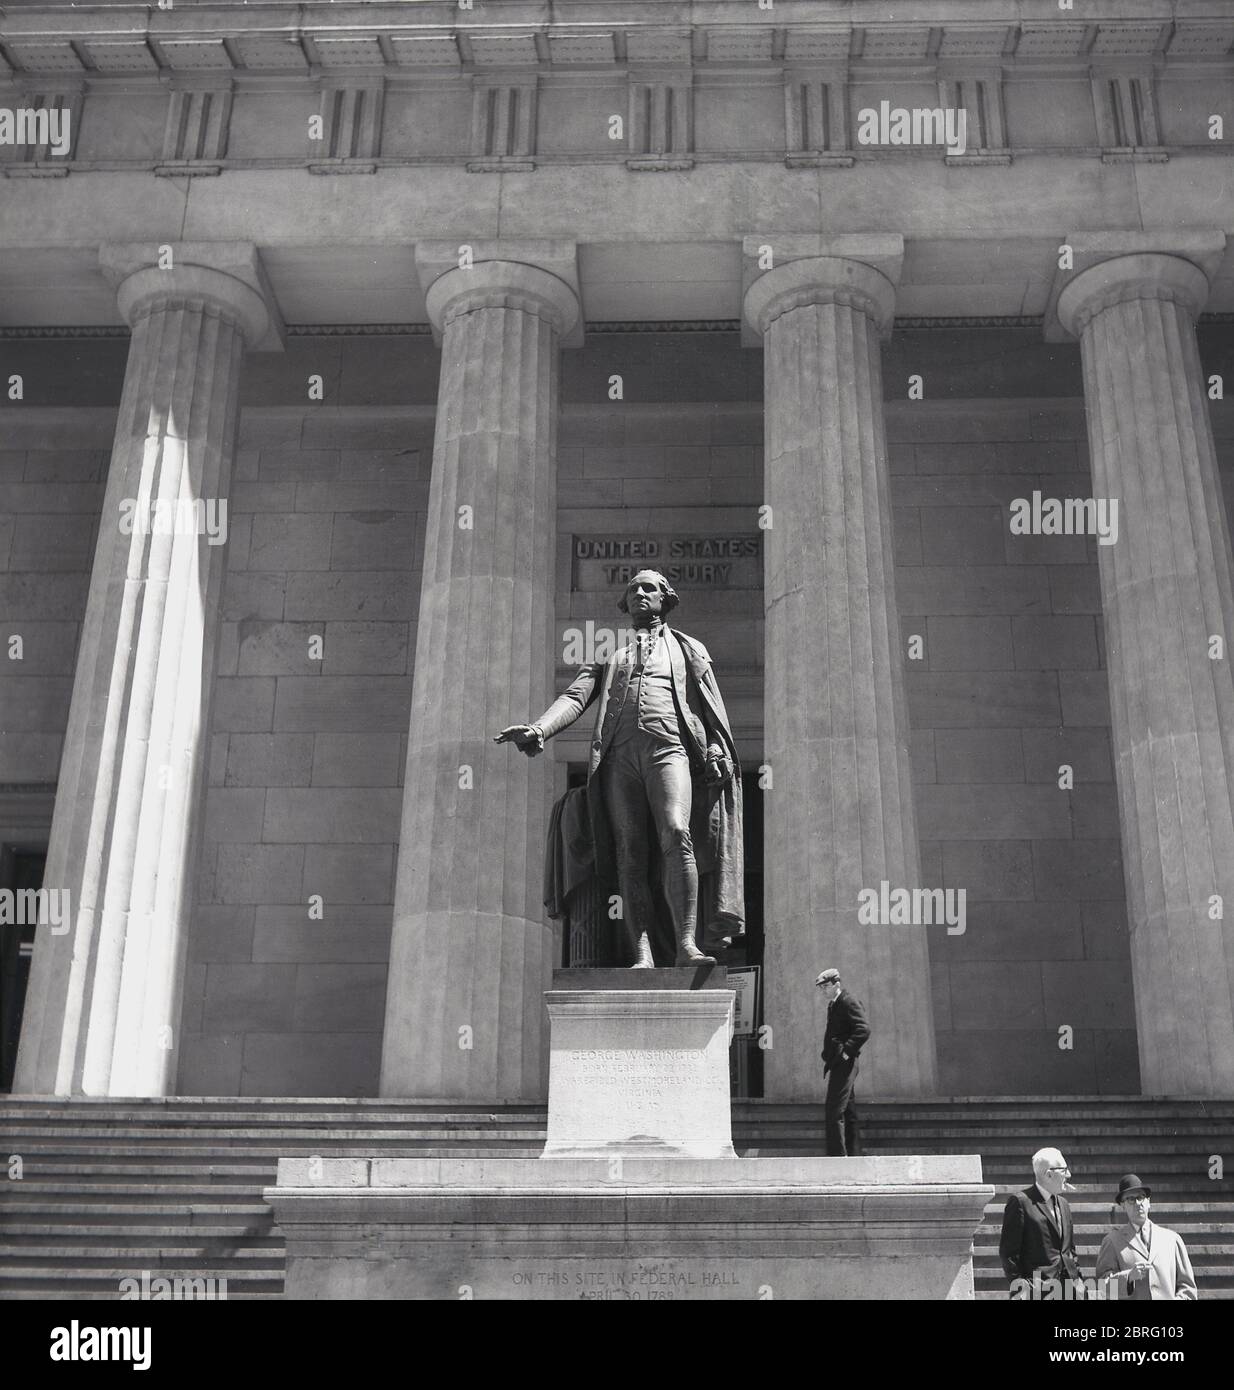 1950s, historical, exterior view of the Federal Hall, a grand columned building in Manhattan, New York, USA. Opened in 1842 for the U.S Custom House for the Port of New York and built in the Greek revival architectural style, it served as a sub-treasury building and replaced an earlier building officially known as 'Federal Hall'. The bronze statue of George Washington by John Qunicy Adams Ward on the steps of the building commemorates the place where he was sworn in as the nation's first president. Stock Photo